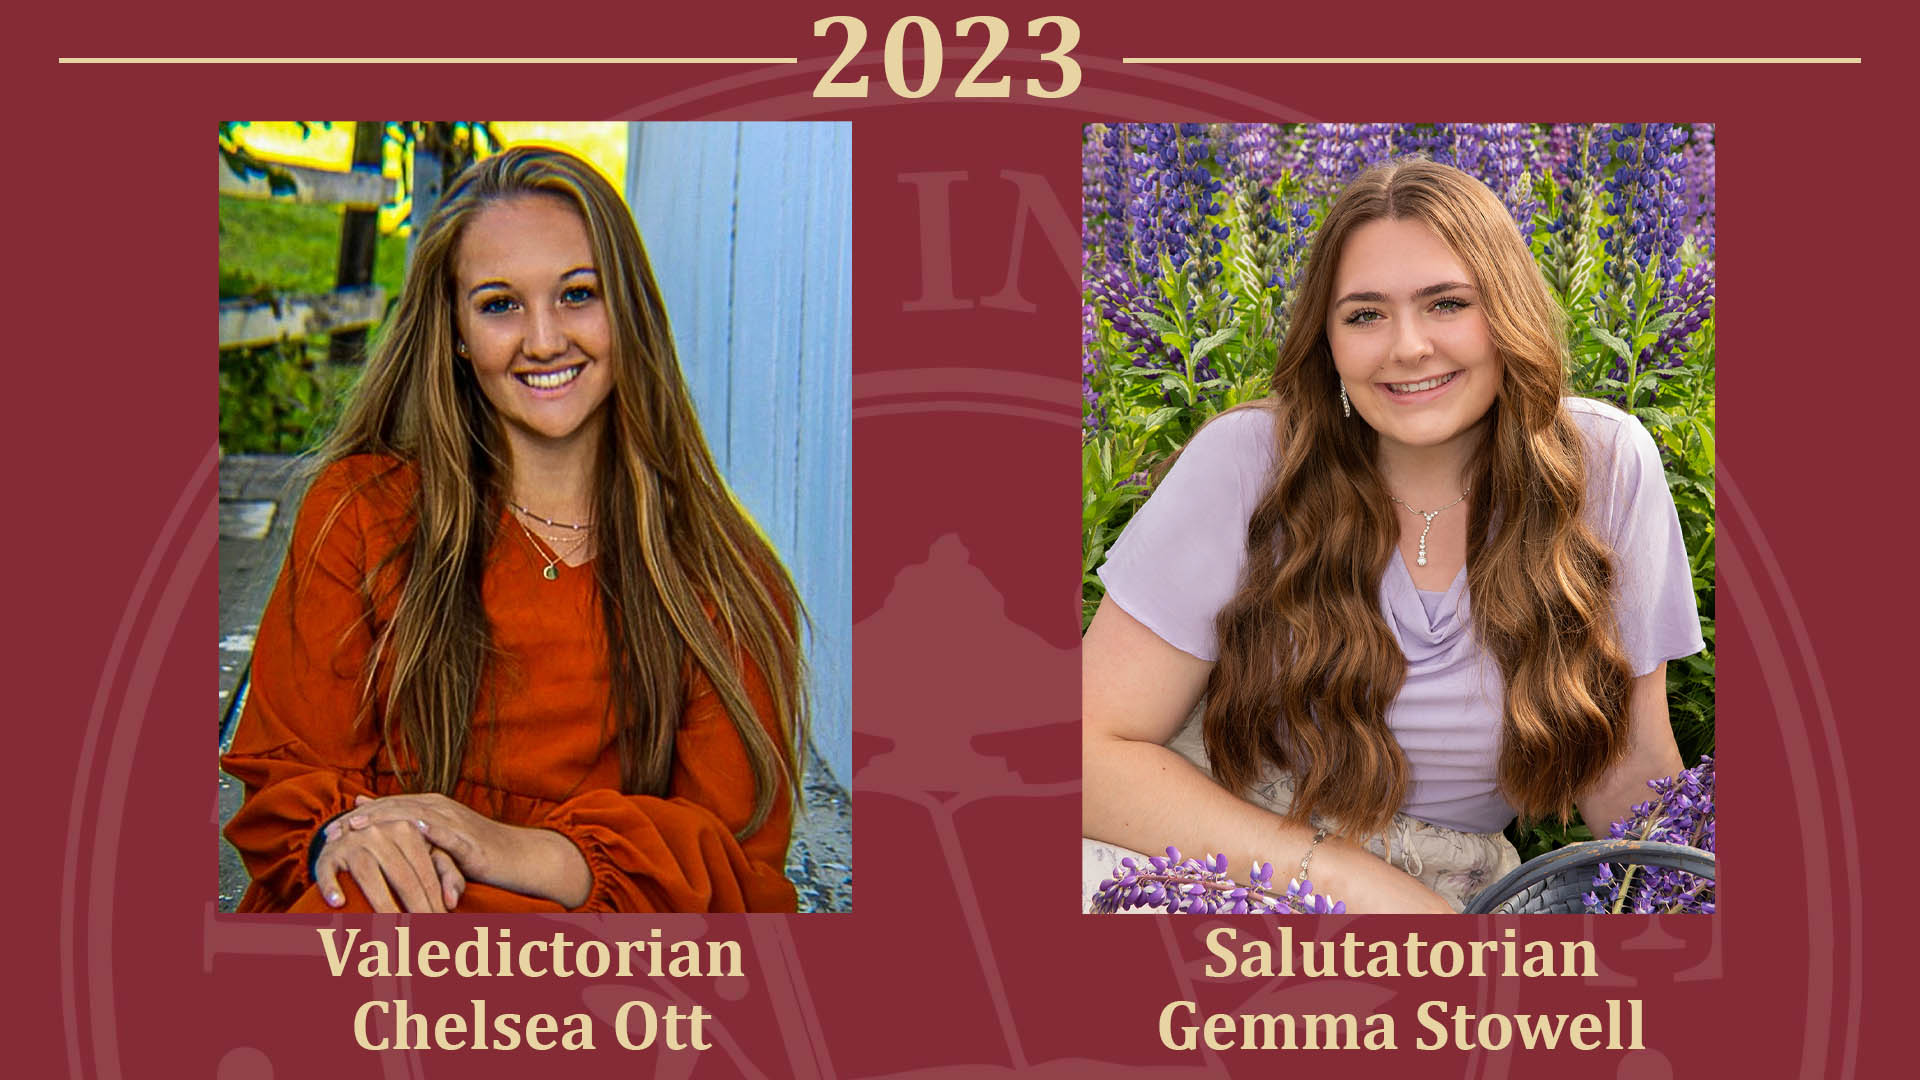 Lyndon Institute Announces the Valedictorian and Salutatorian for the Class of 2023